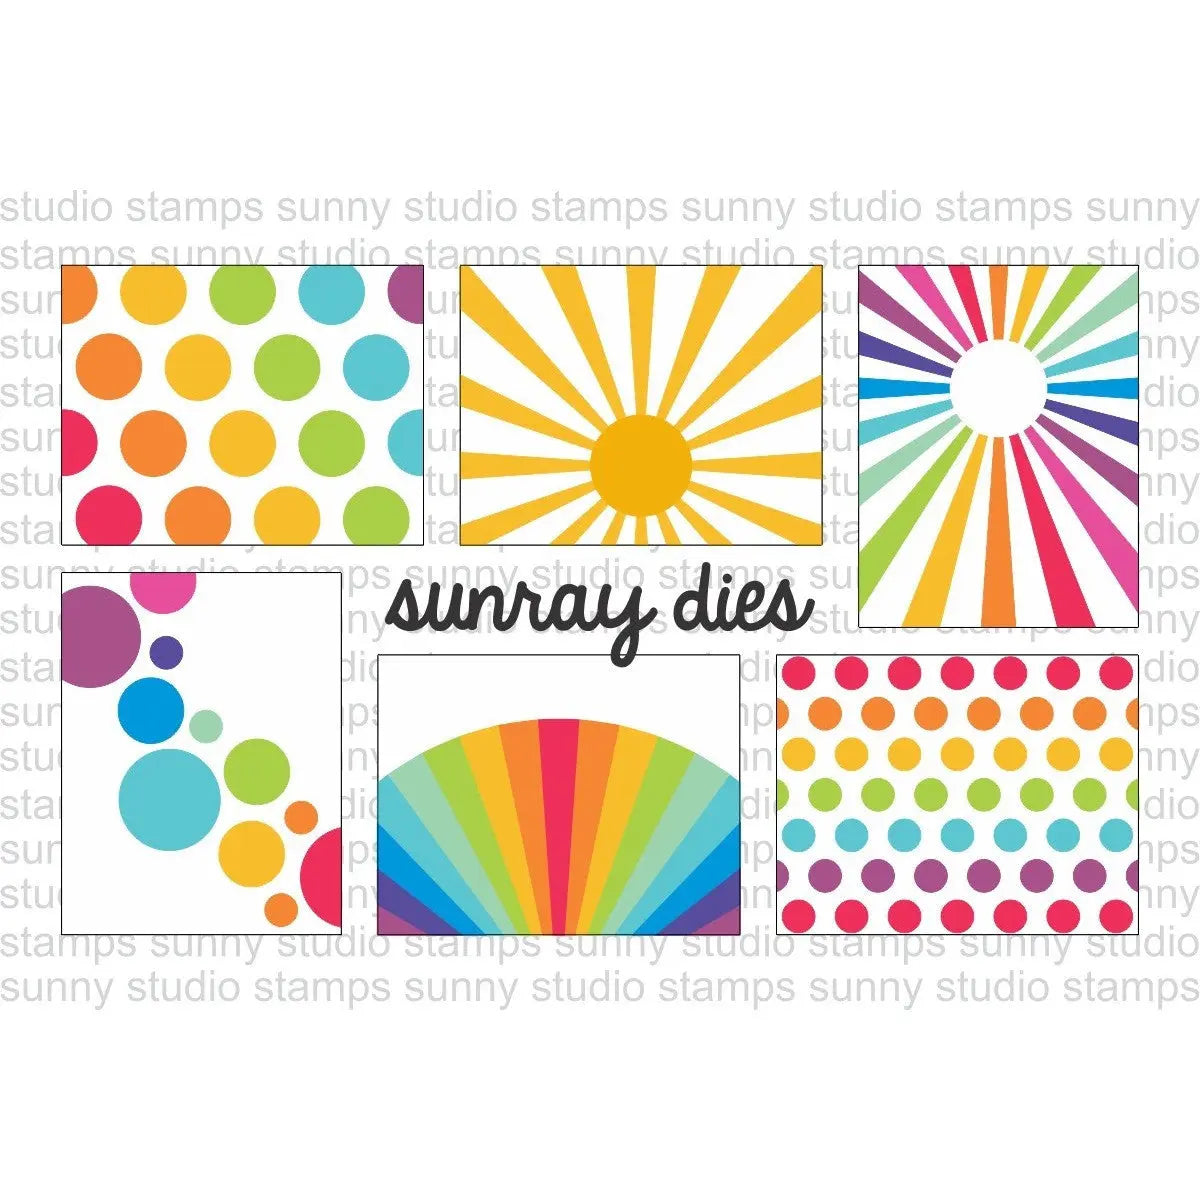 Sunny Studio Stamps Sun Ray Sunburst Metal Cutting Dies Card Background Sketches